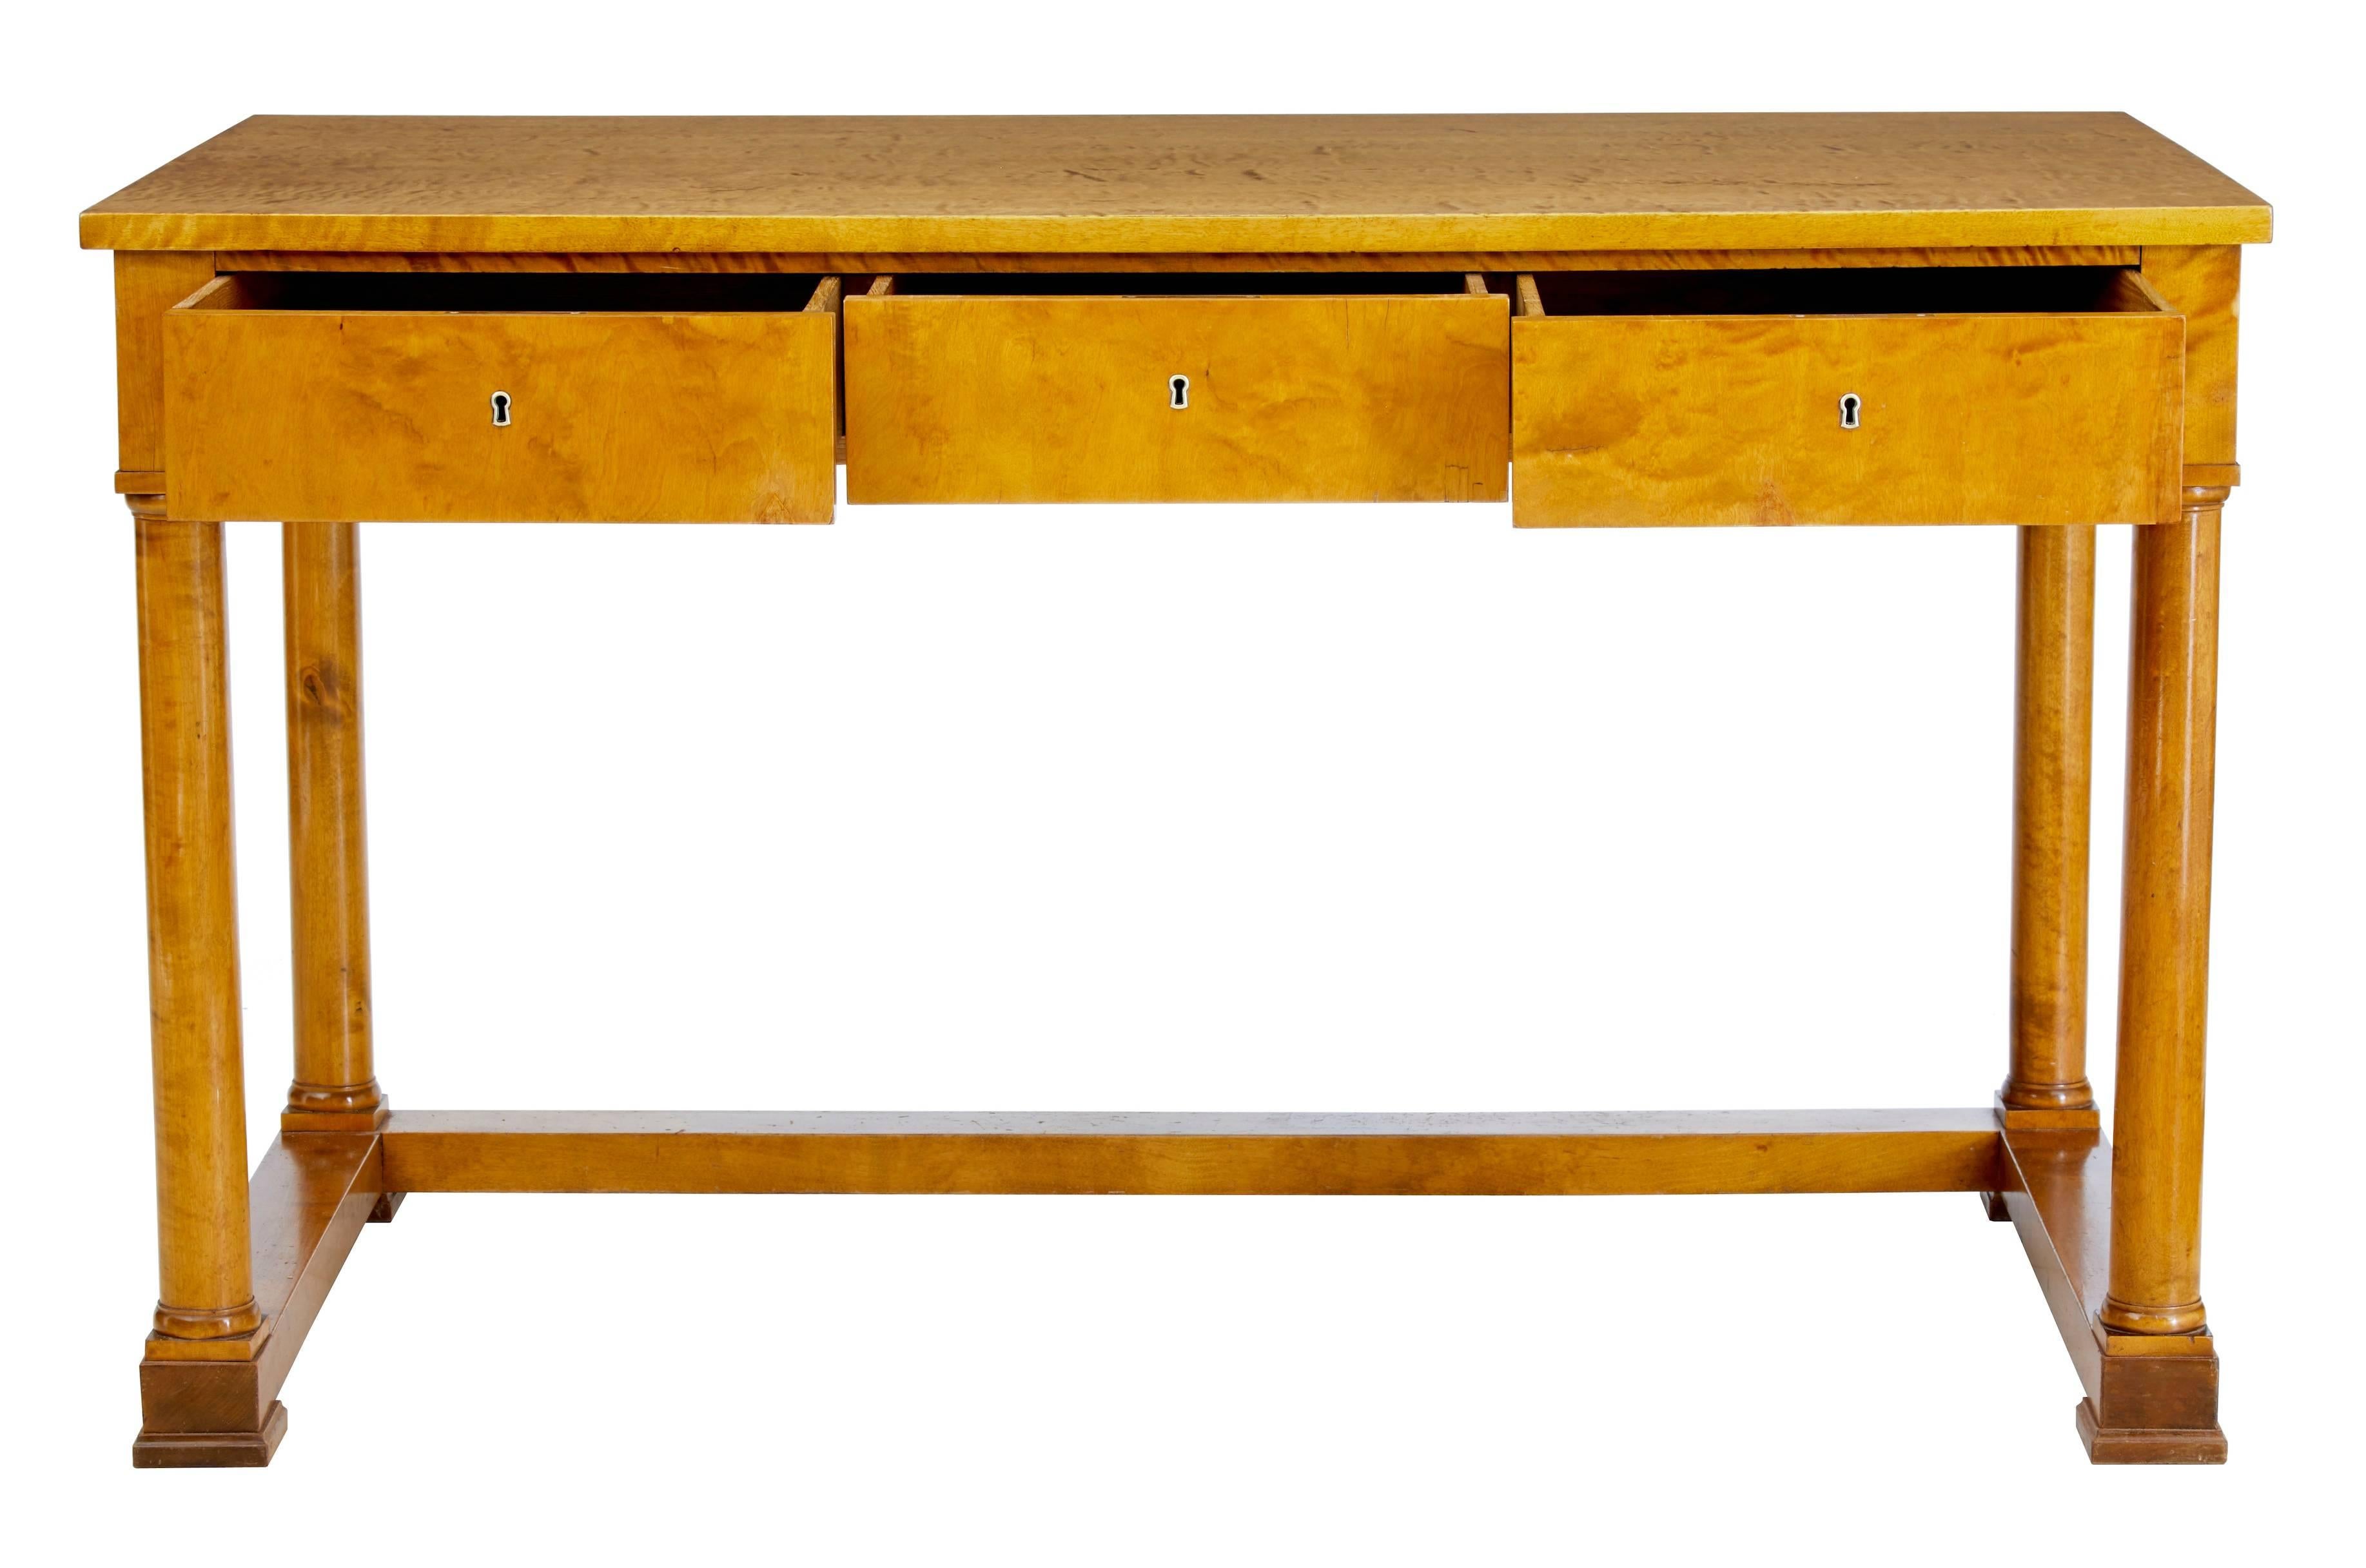 Swedish Empire revival birch desk, circa 1880.
Elegant table in fine birch veneers. Three oak lined drawers to the front.
Standing on four column turned legs, united by stretcher.
Minor veneer restorations.
Measures: Height 30 1/2